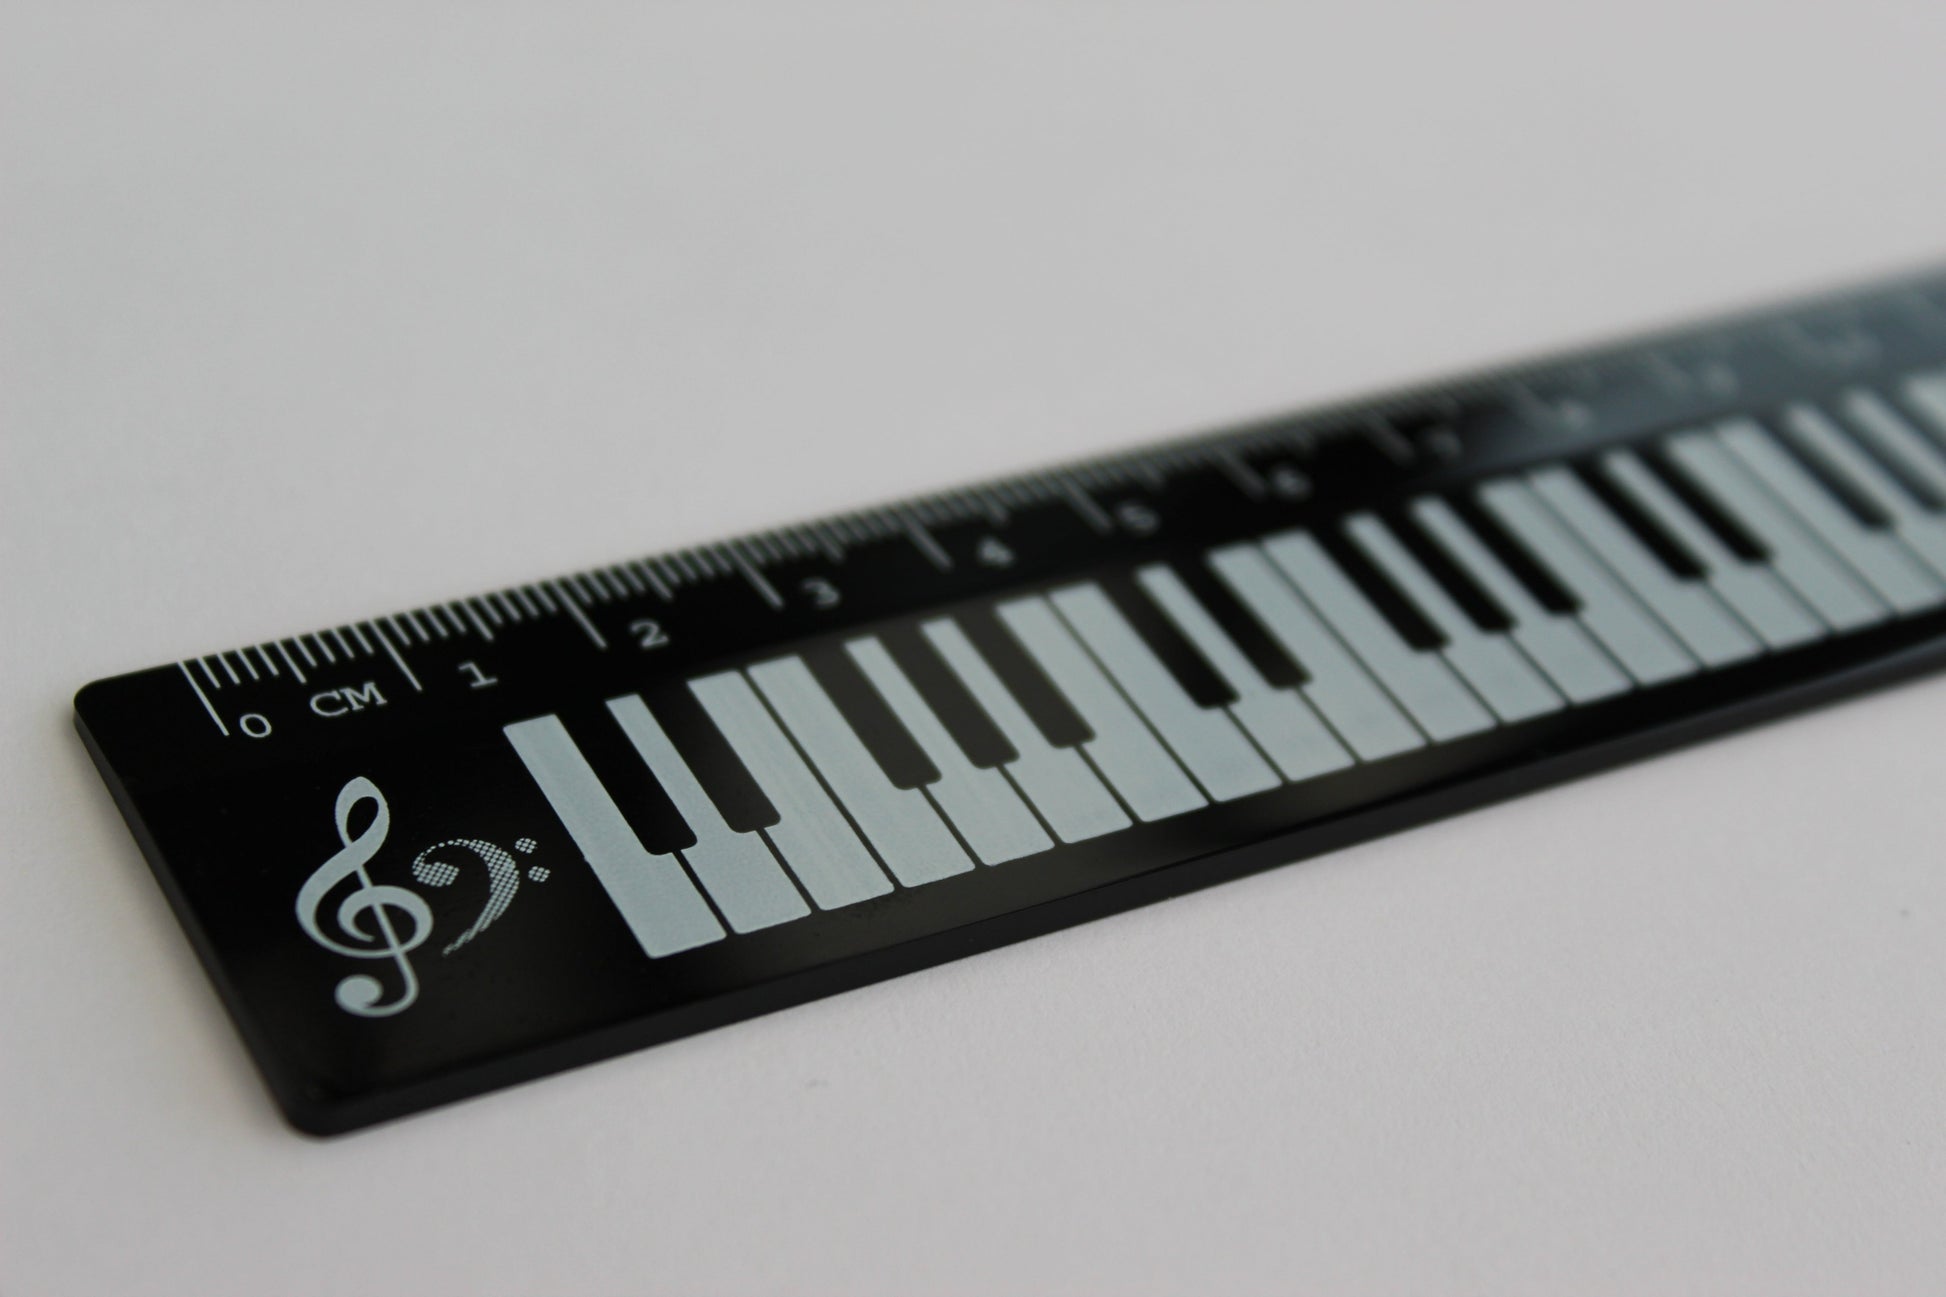 Black ruler with a piano keyboard and treble and bass clef design.